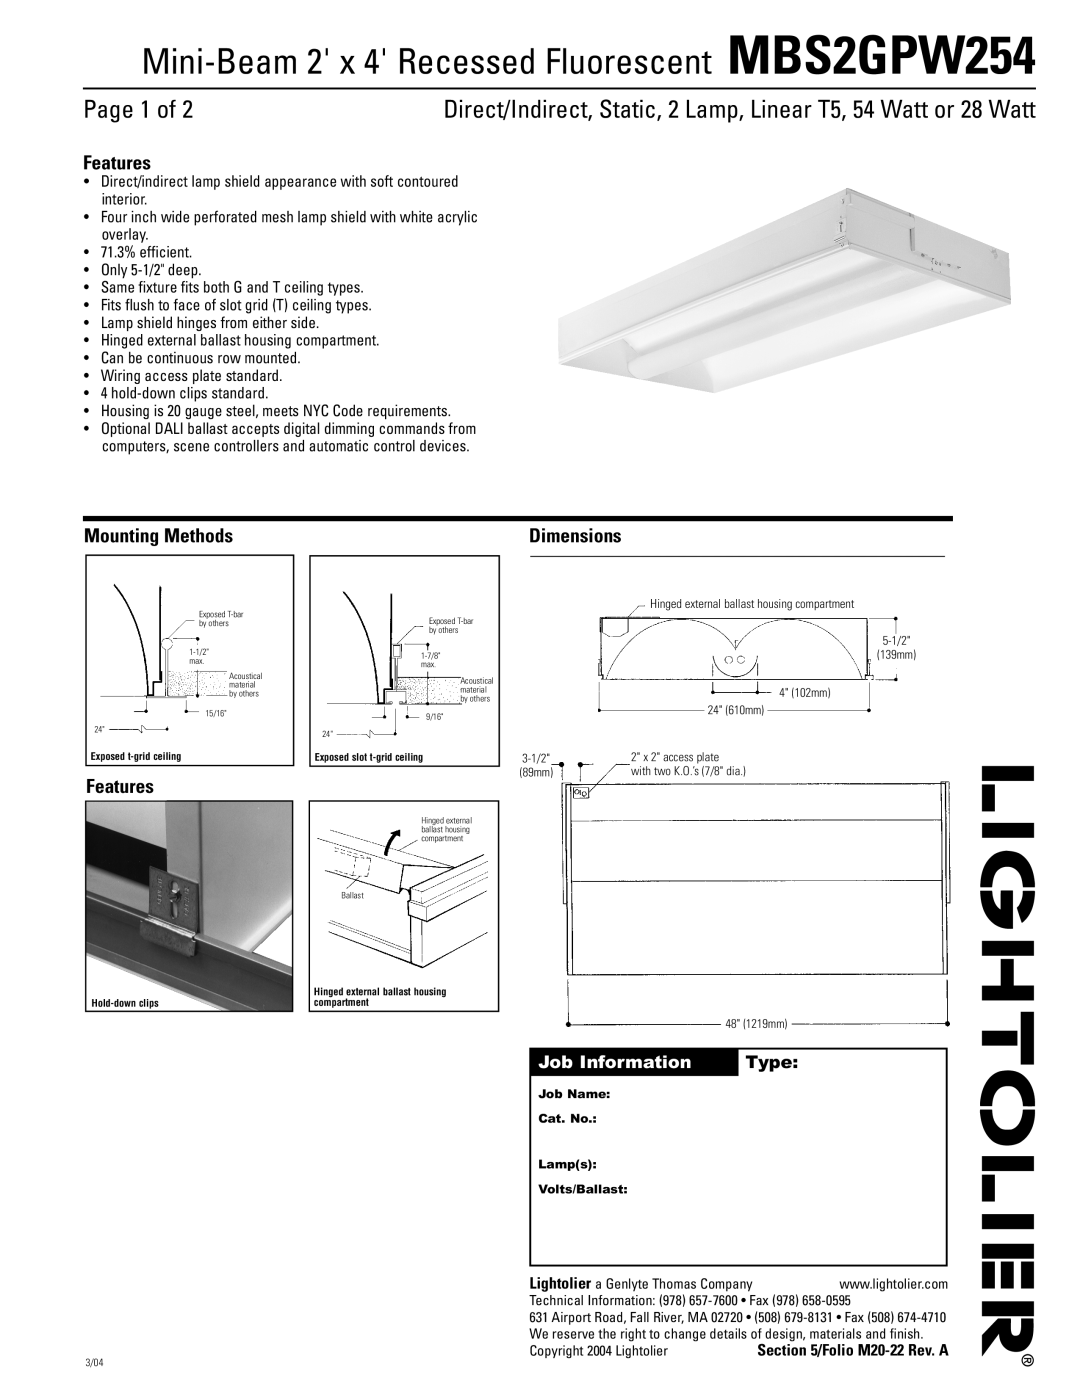 Lightolier MBS2GPW254 dimensions Page 1 of, Features, Mounting Methods, Dimensions, Job Information Type 